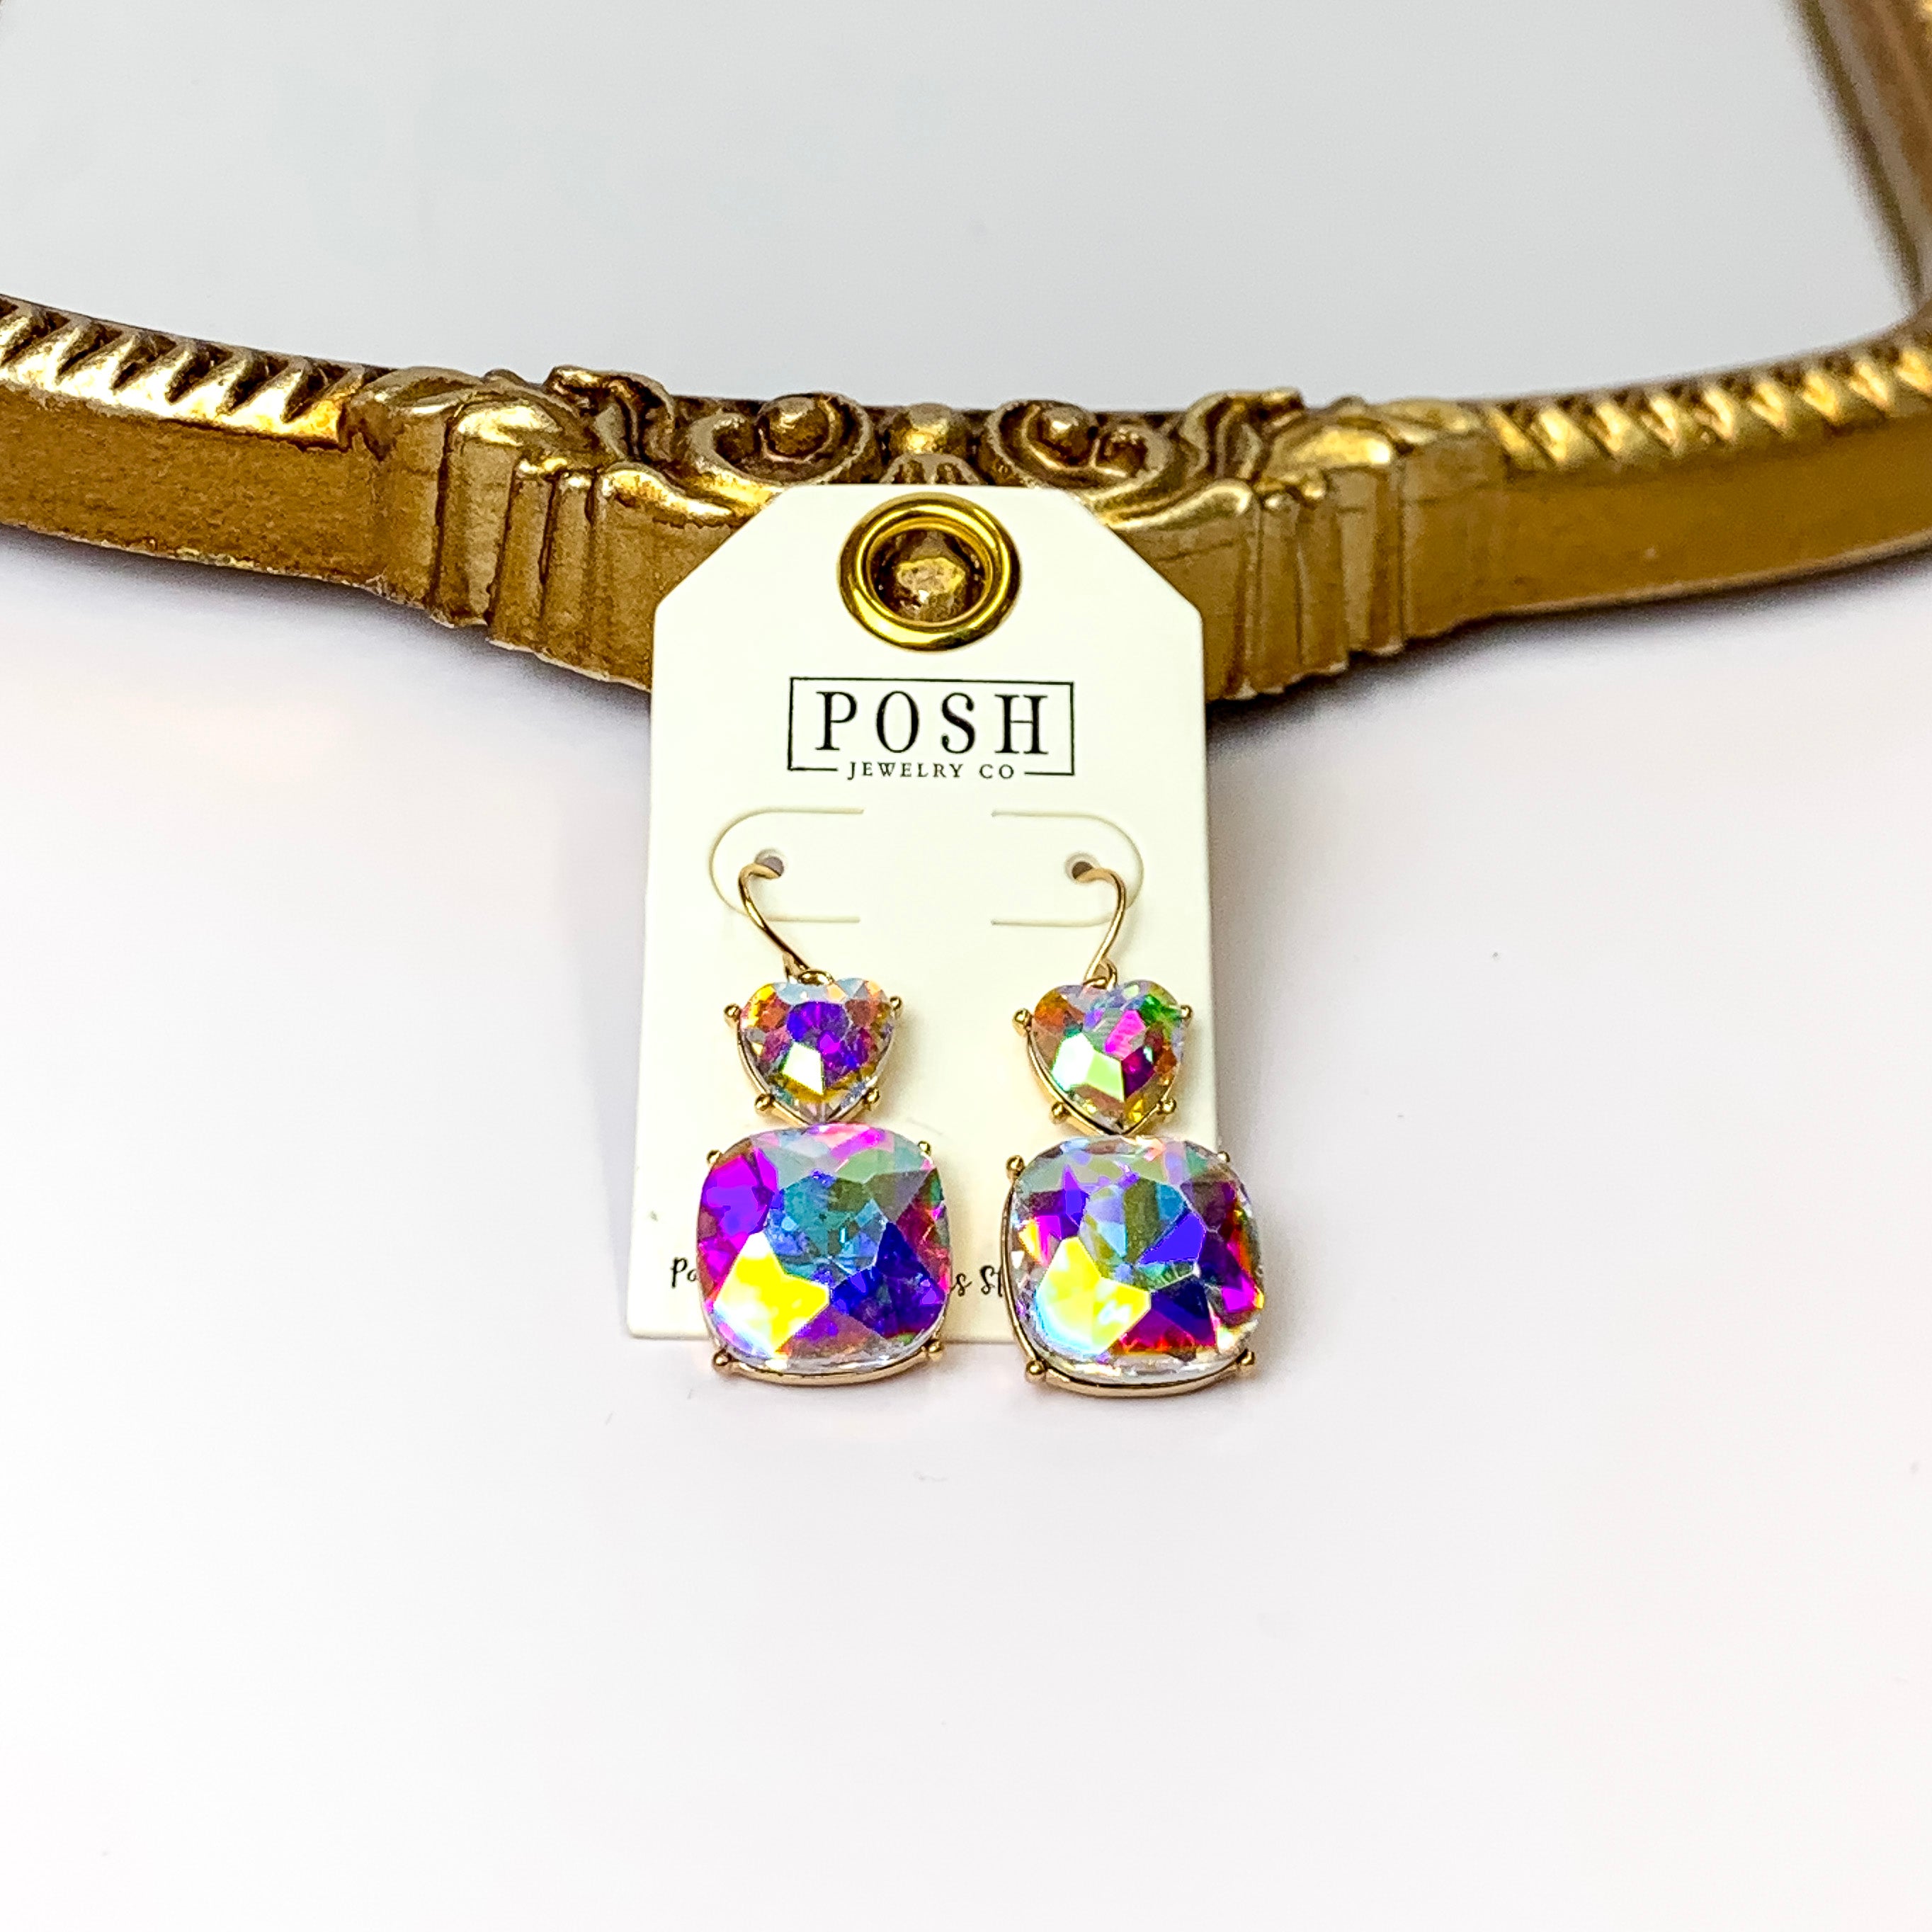 Posh by Pink Panache | Gold Tone Fuchsia Pink Heart Shaped and Cushion Cut Crystal Drop Earrings - Giddy Up Glamour Boutique